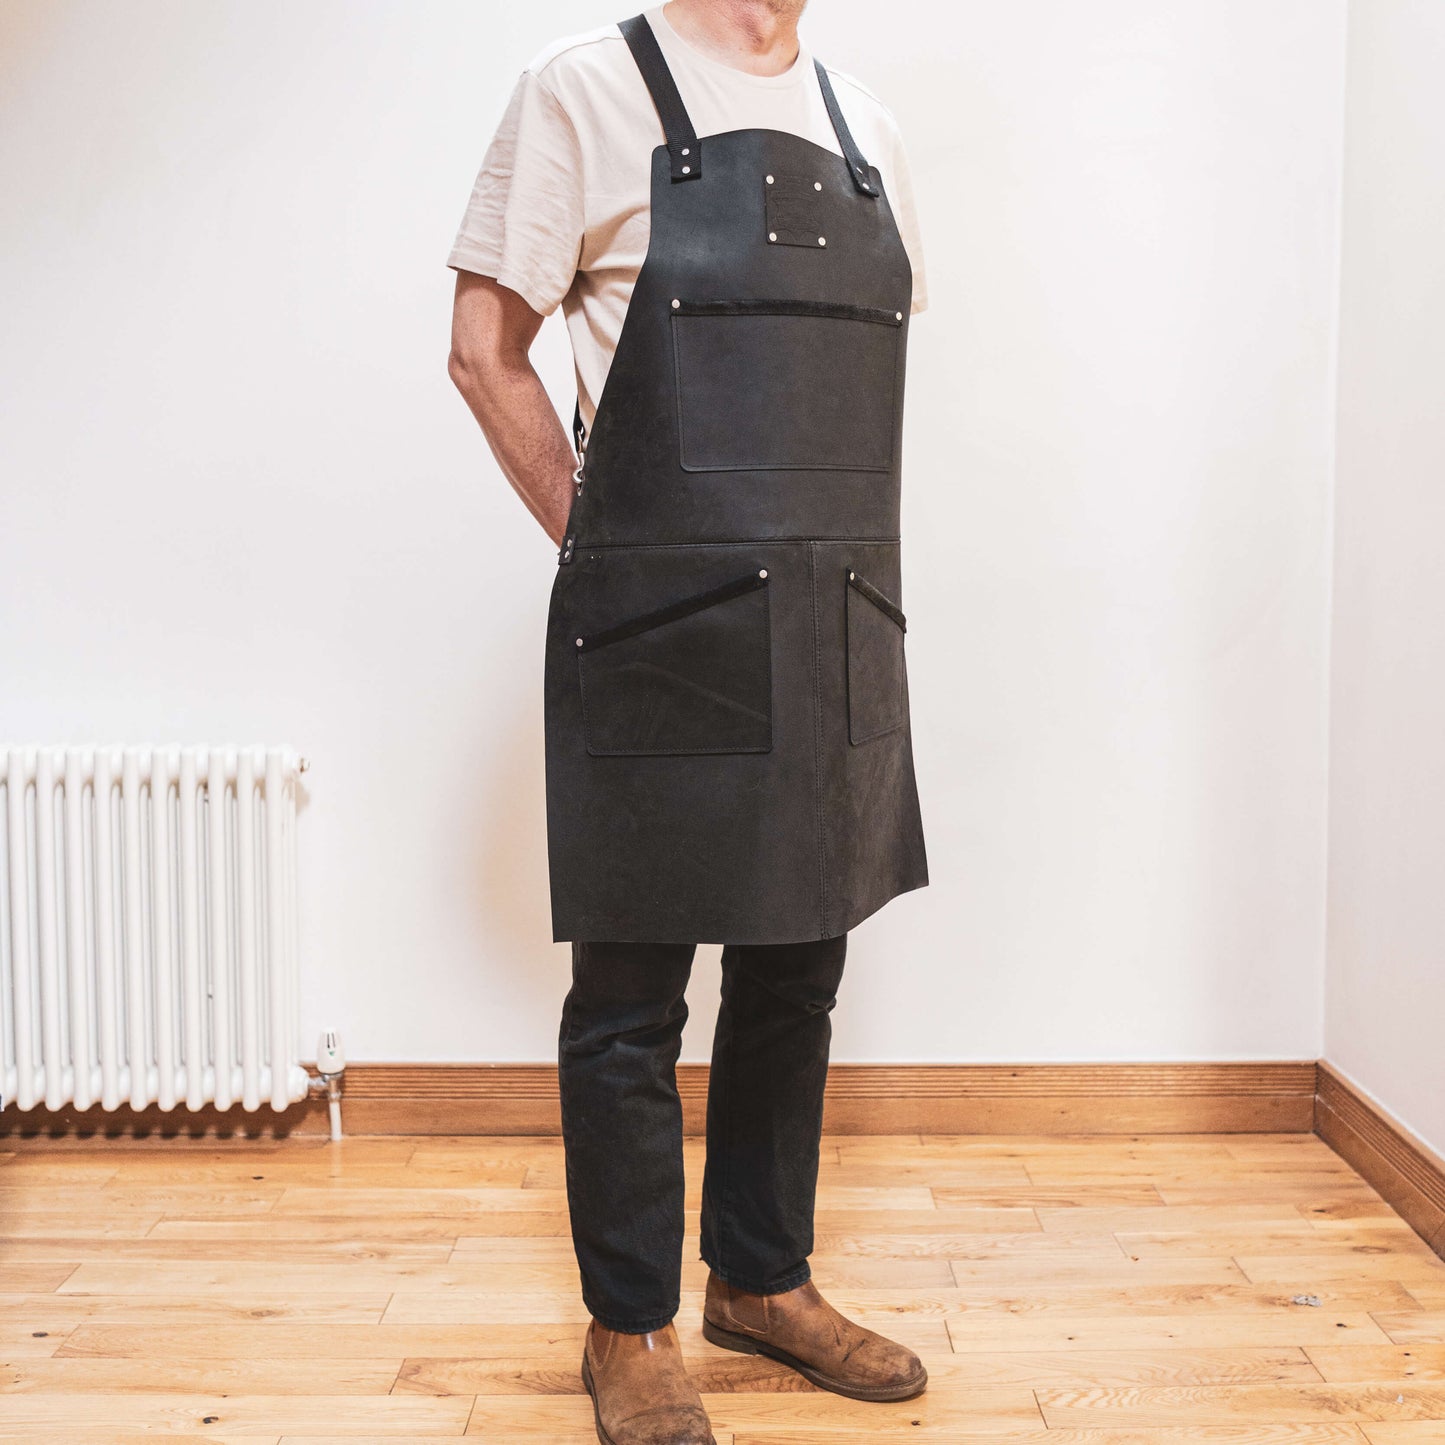 A joiner wearing a dark apron by The Durham Leatherworker stands in a room with wooden flooring, partially facing the camera but not showing their face.